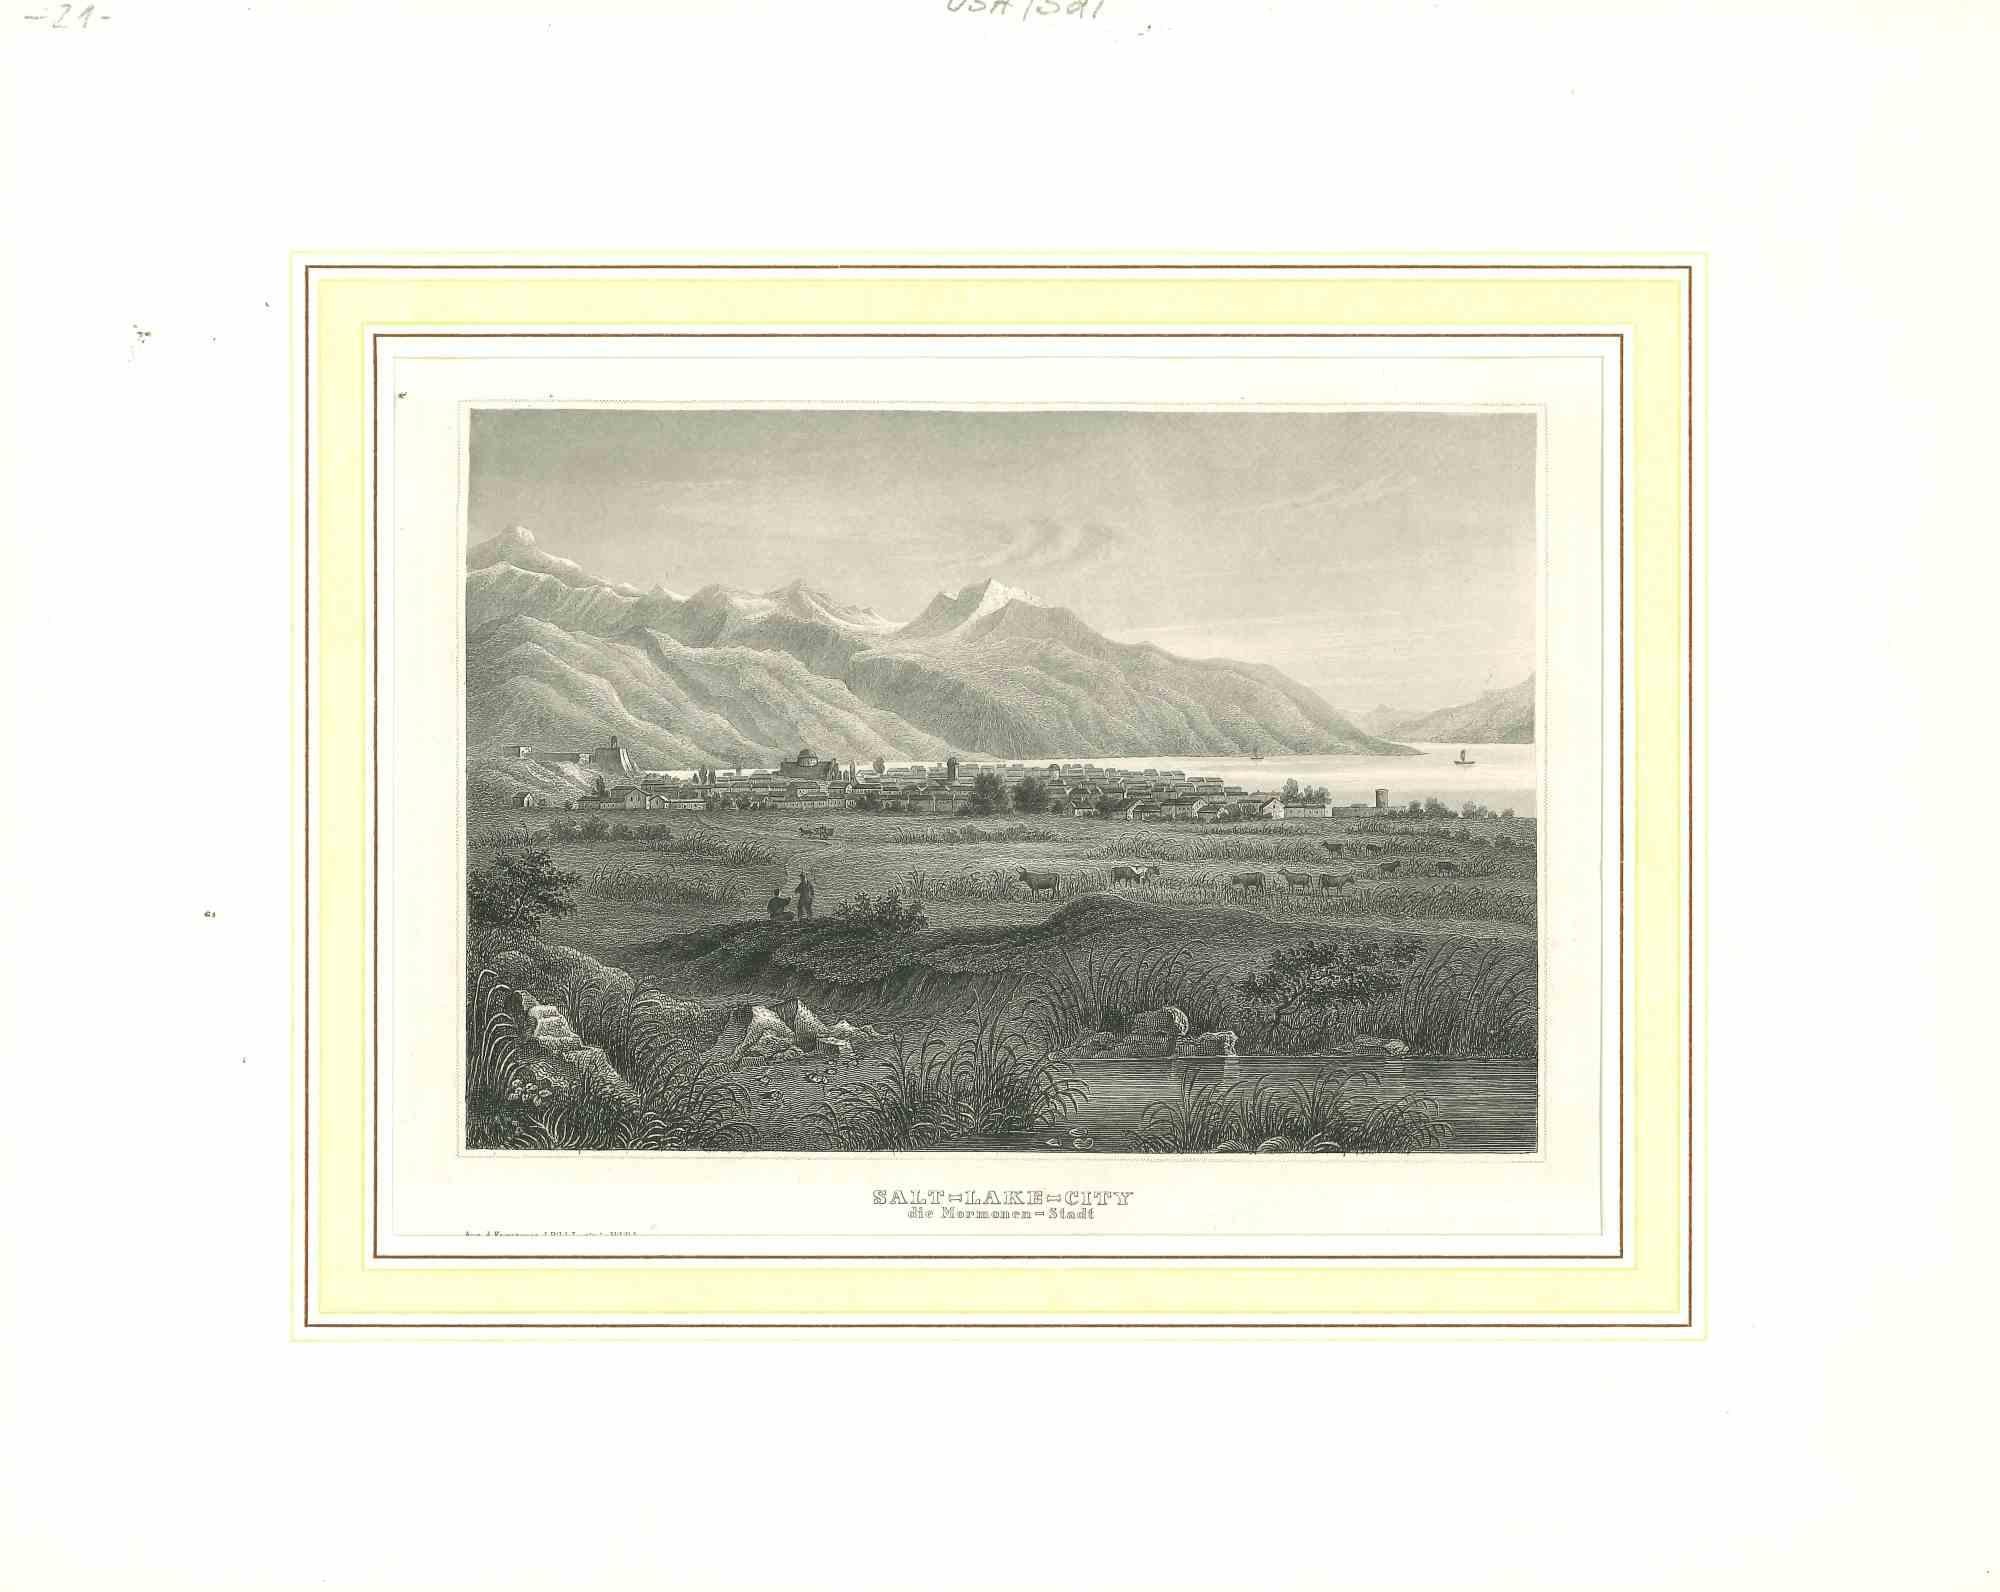 Unknown Figurative Print - Ancient View of Salt Lake City - Original Lithograph - Early 19th Century